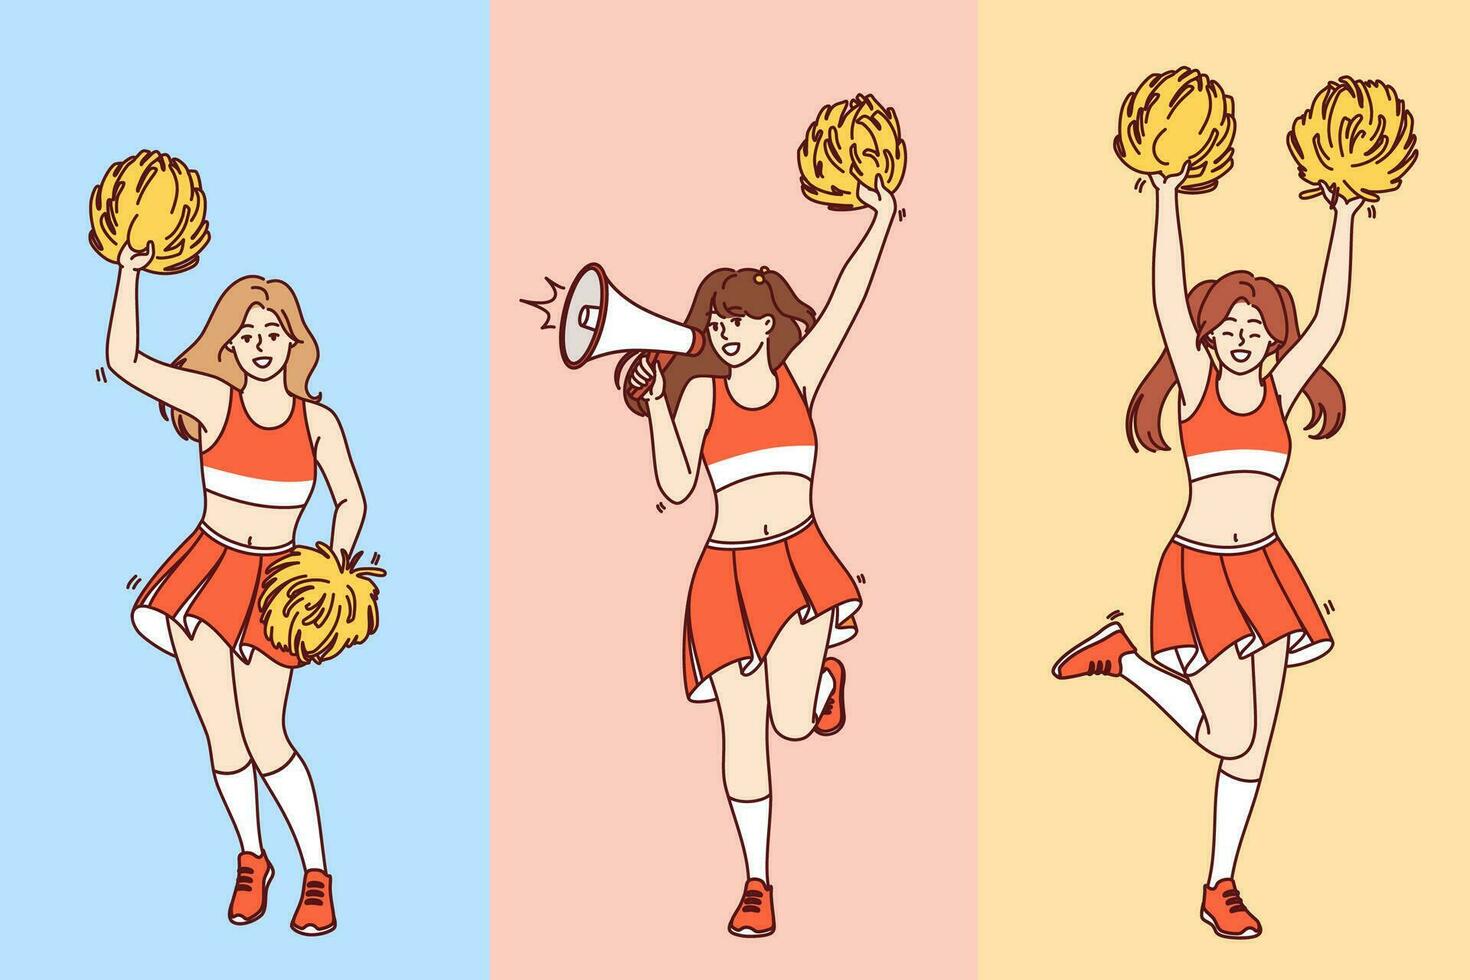 Girls cheerleaders jump and wave pom-poms in arms supporting fans of sports football team. Female cheerleaders with megaphone in skirts and tops perform before start of baseball tournament vector